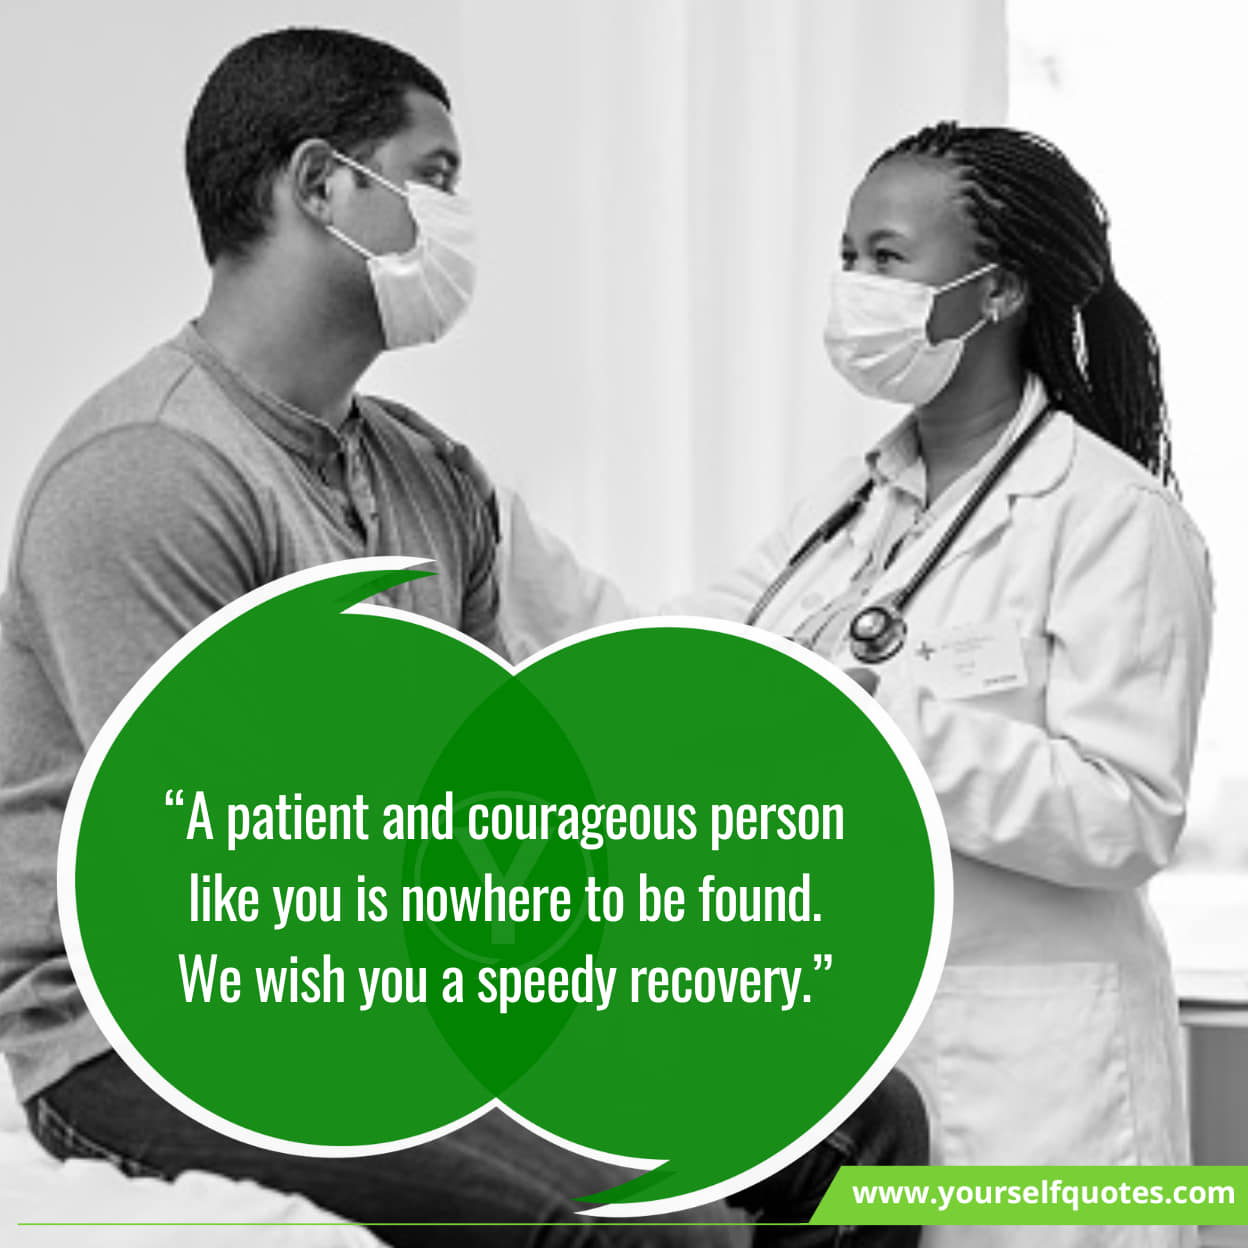 Motivational Encouraging Messages For Speedy Recovery